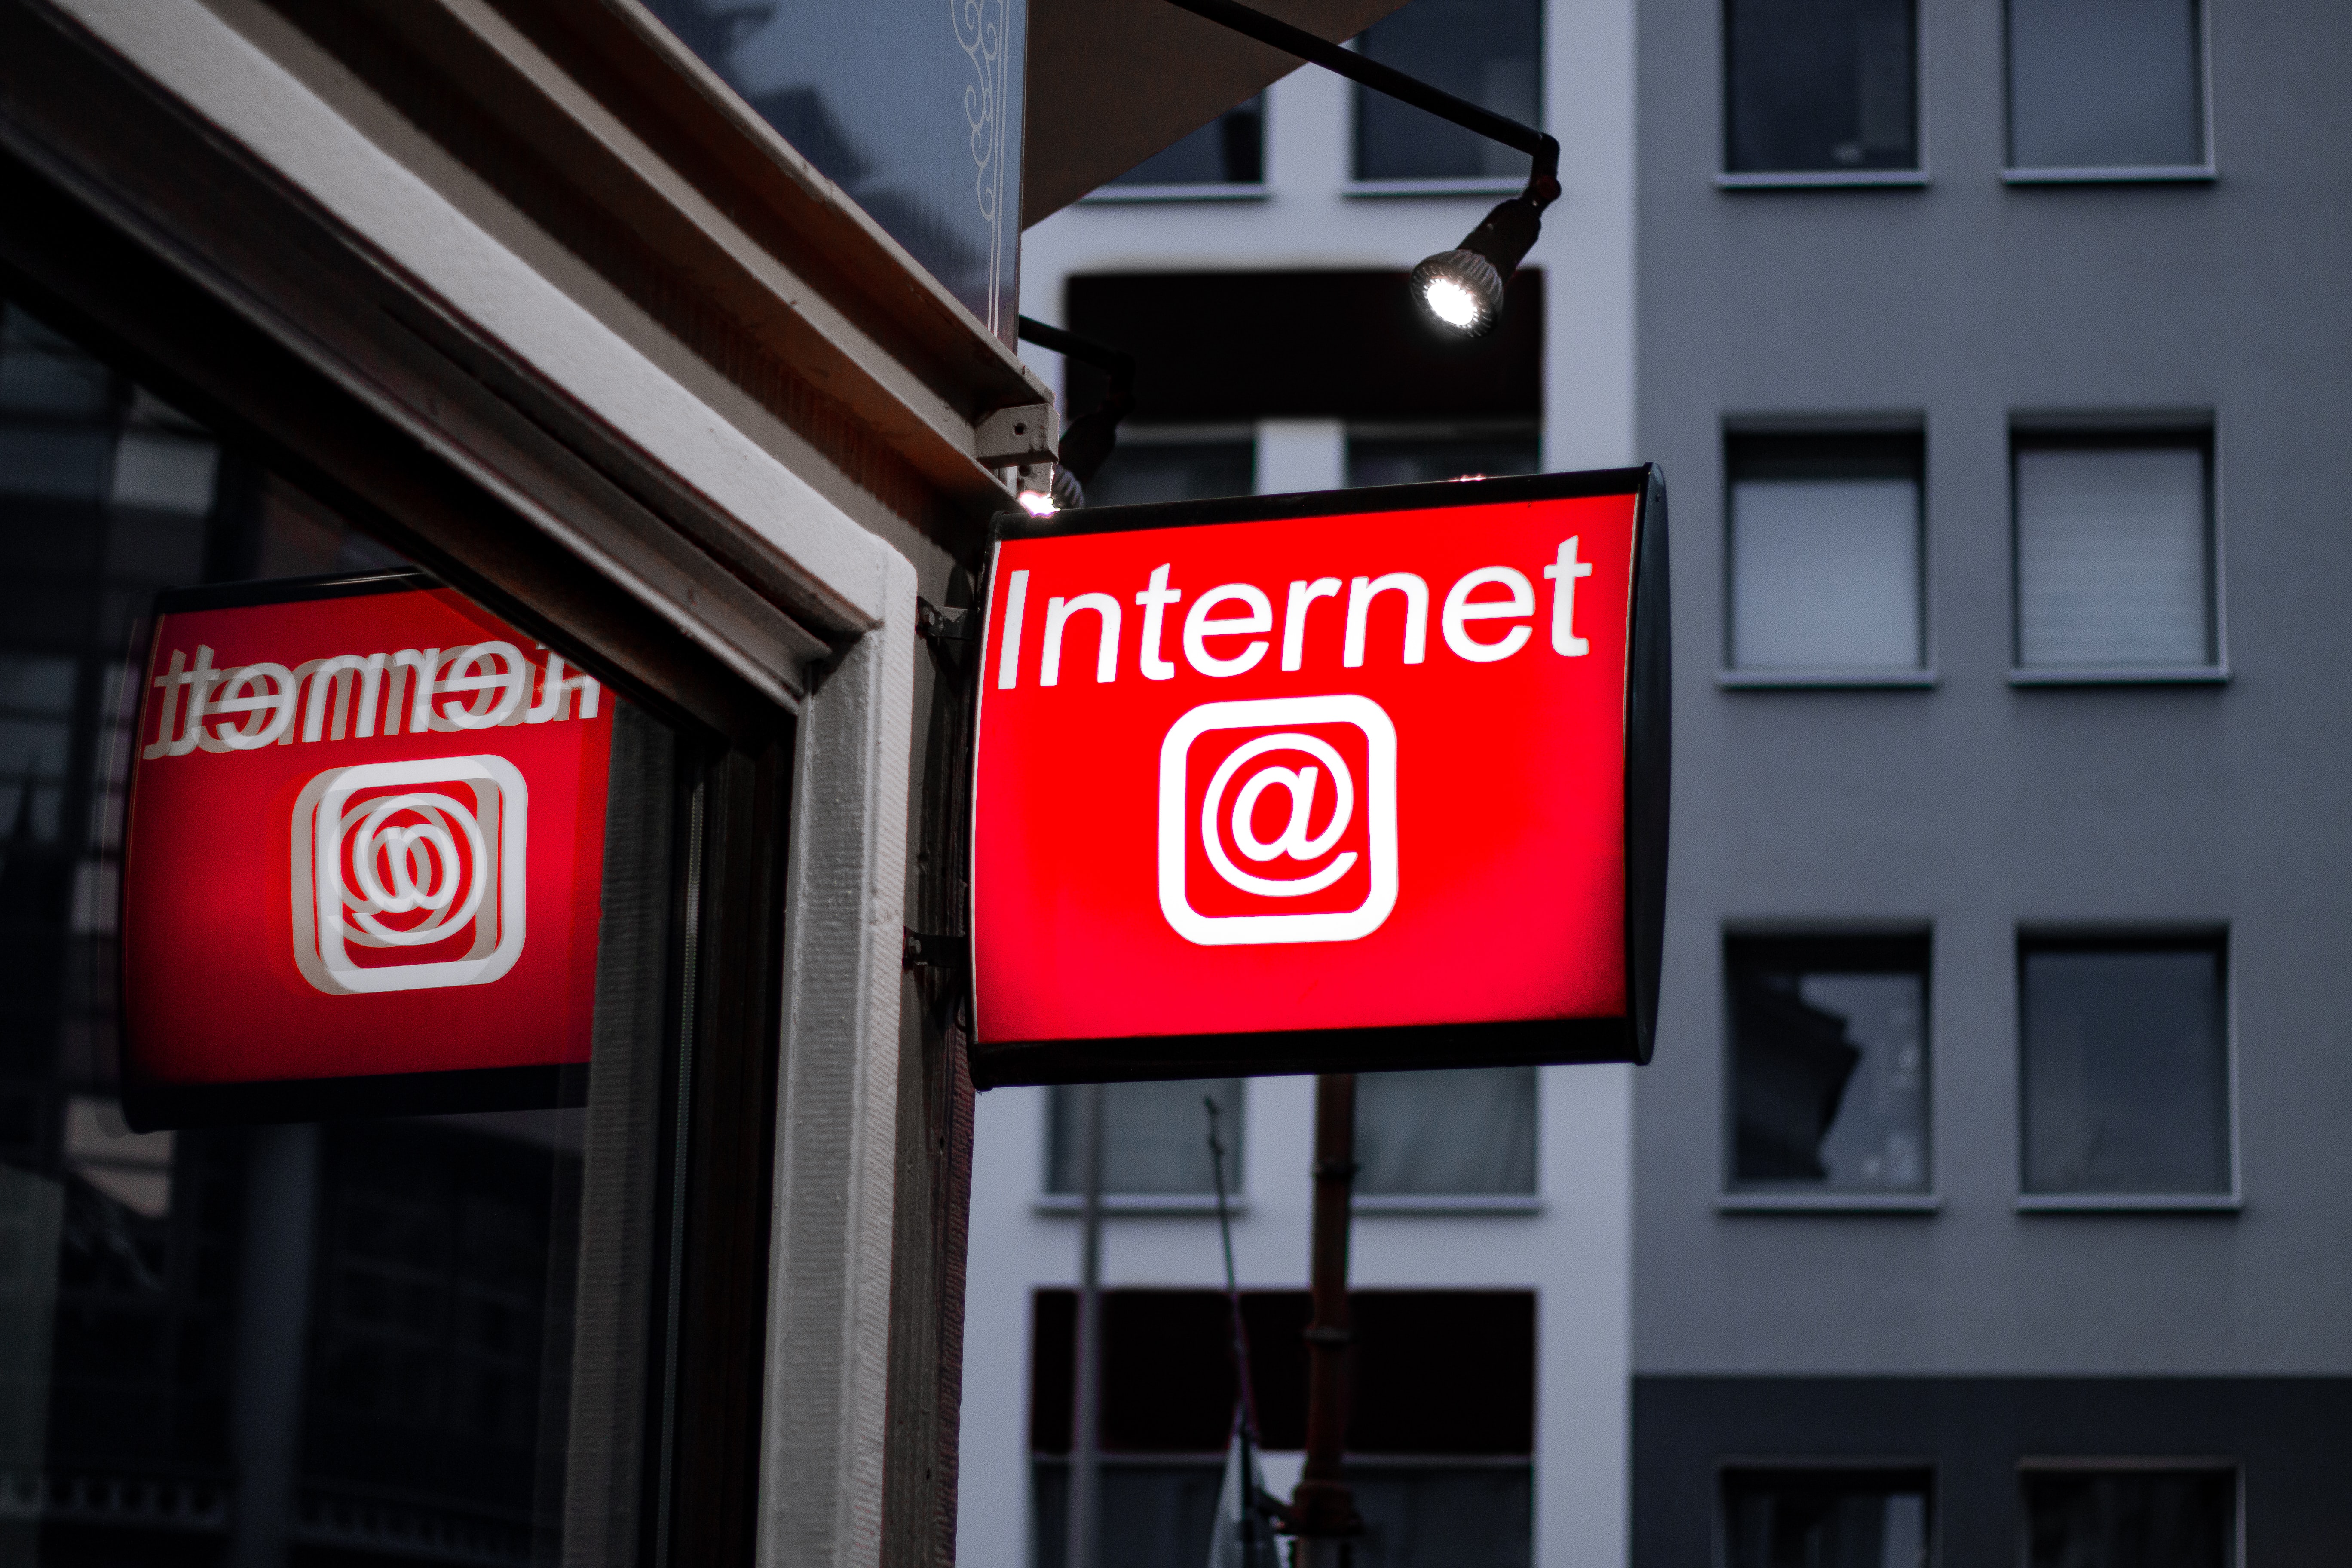 Shows a sign outside a shop that reads Internet with an @ symbol